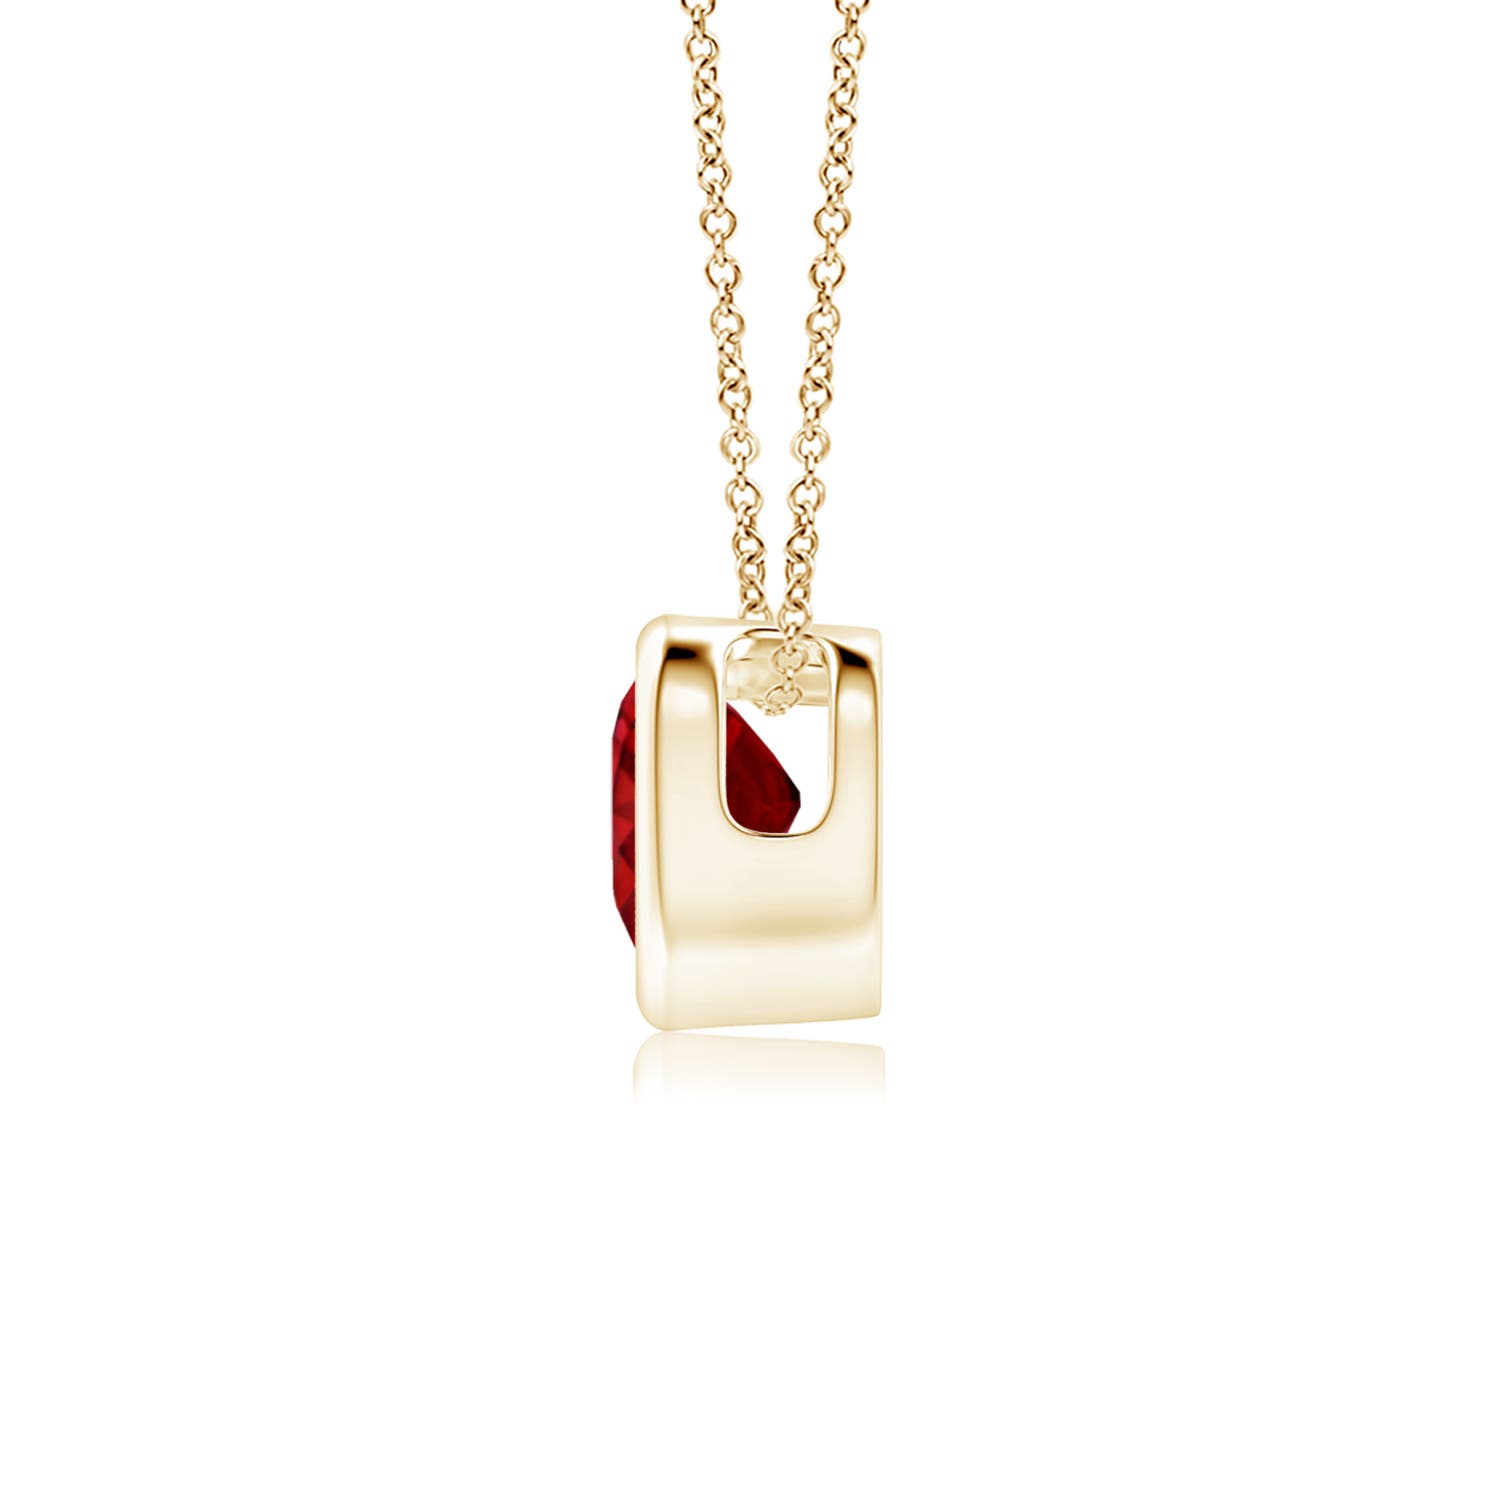 AAAA - Ruby / 0.3 CT / 14 KT Yellow Gold